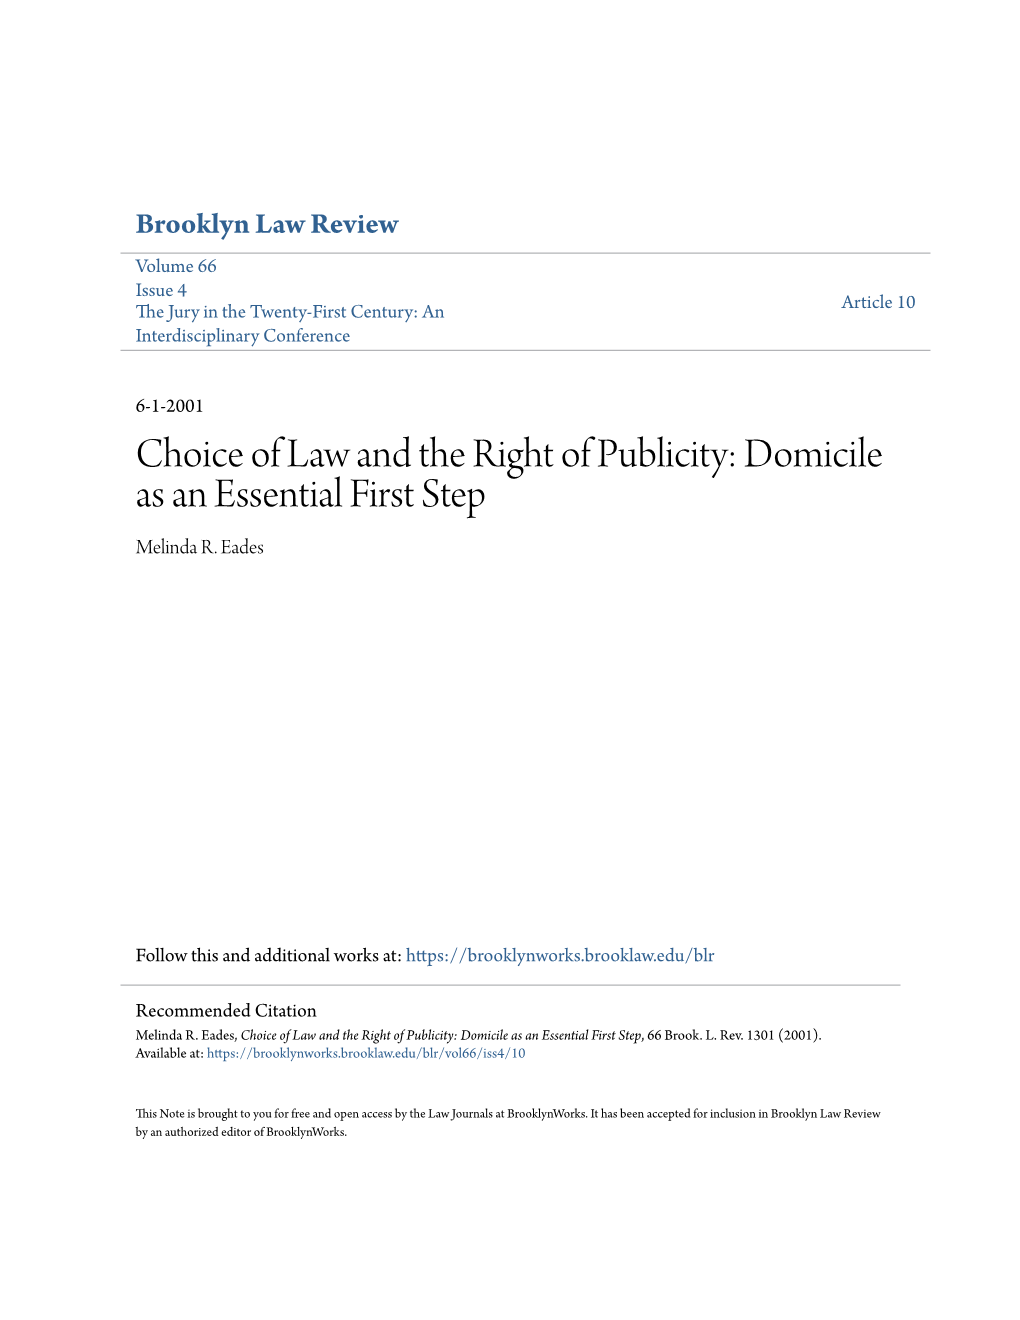 Choice of Law and the Right of Publicity: Domicile As an Essential First Step Melinda R